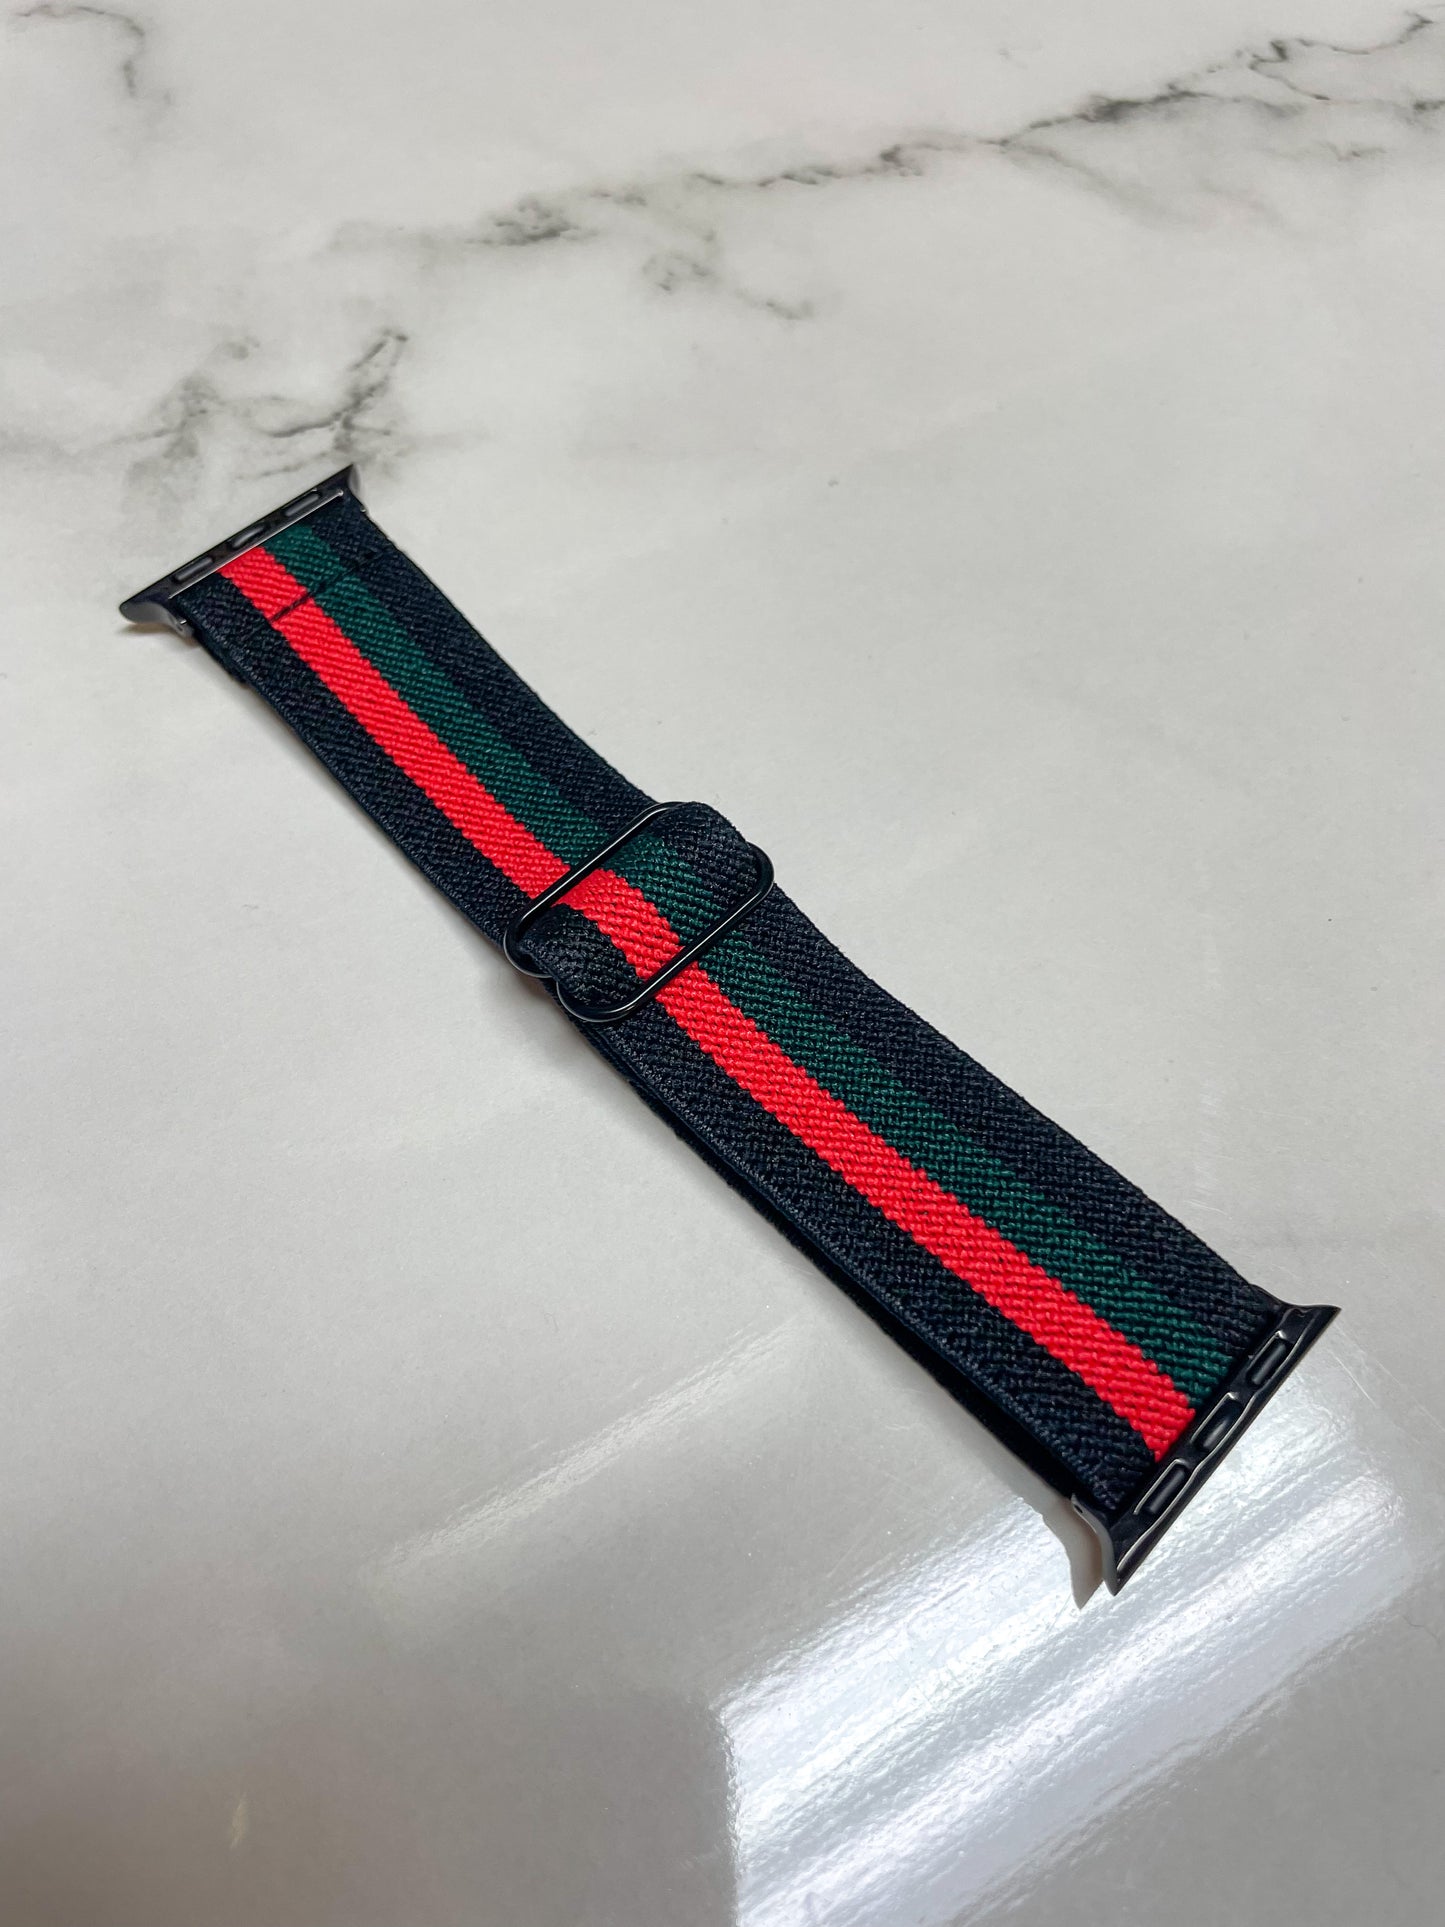 SALE red/green/black Apple Watch band